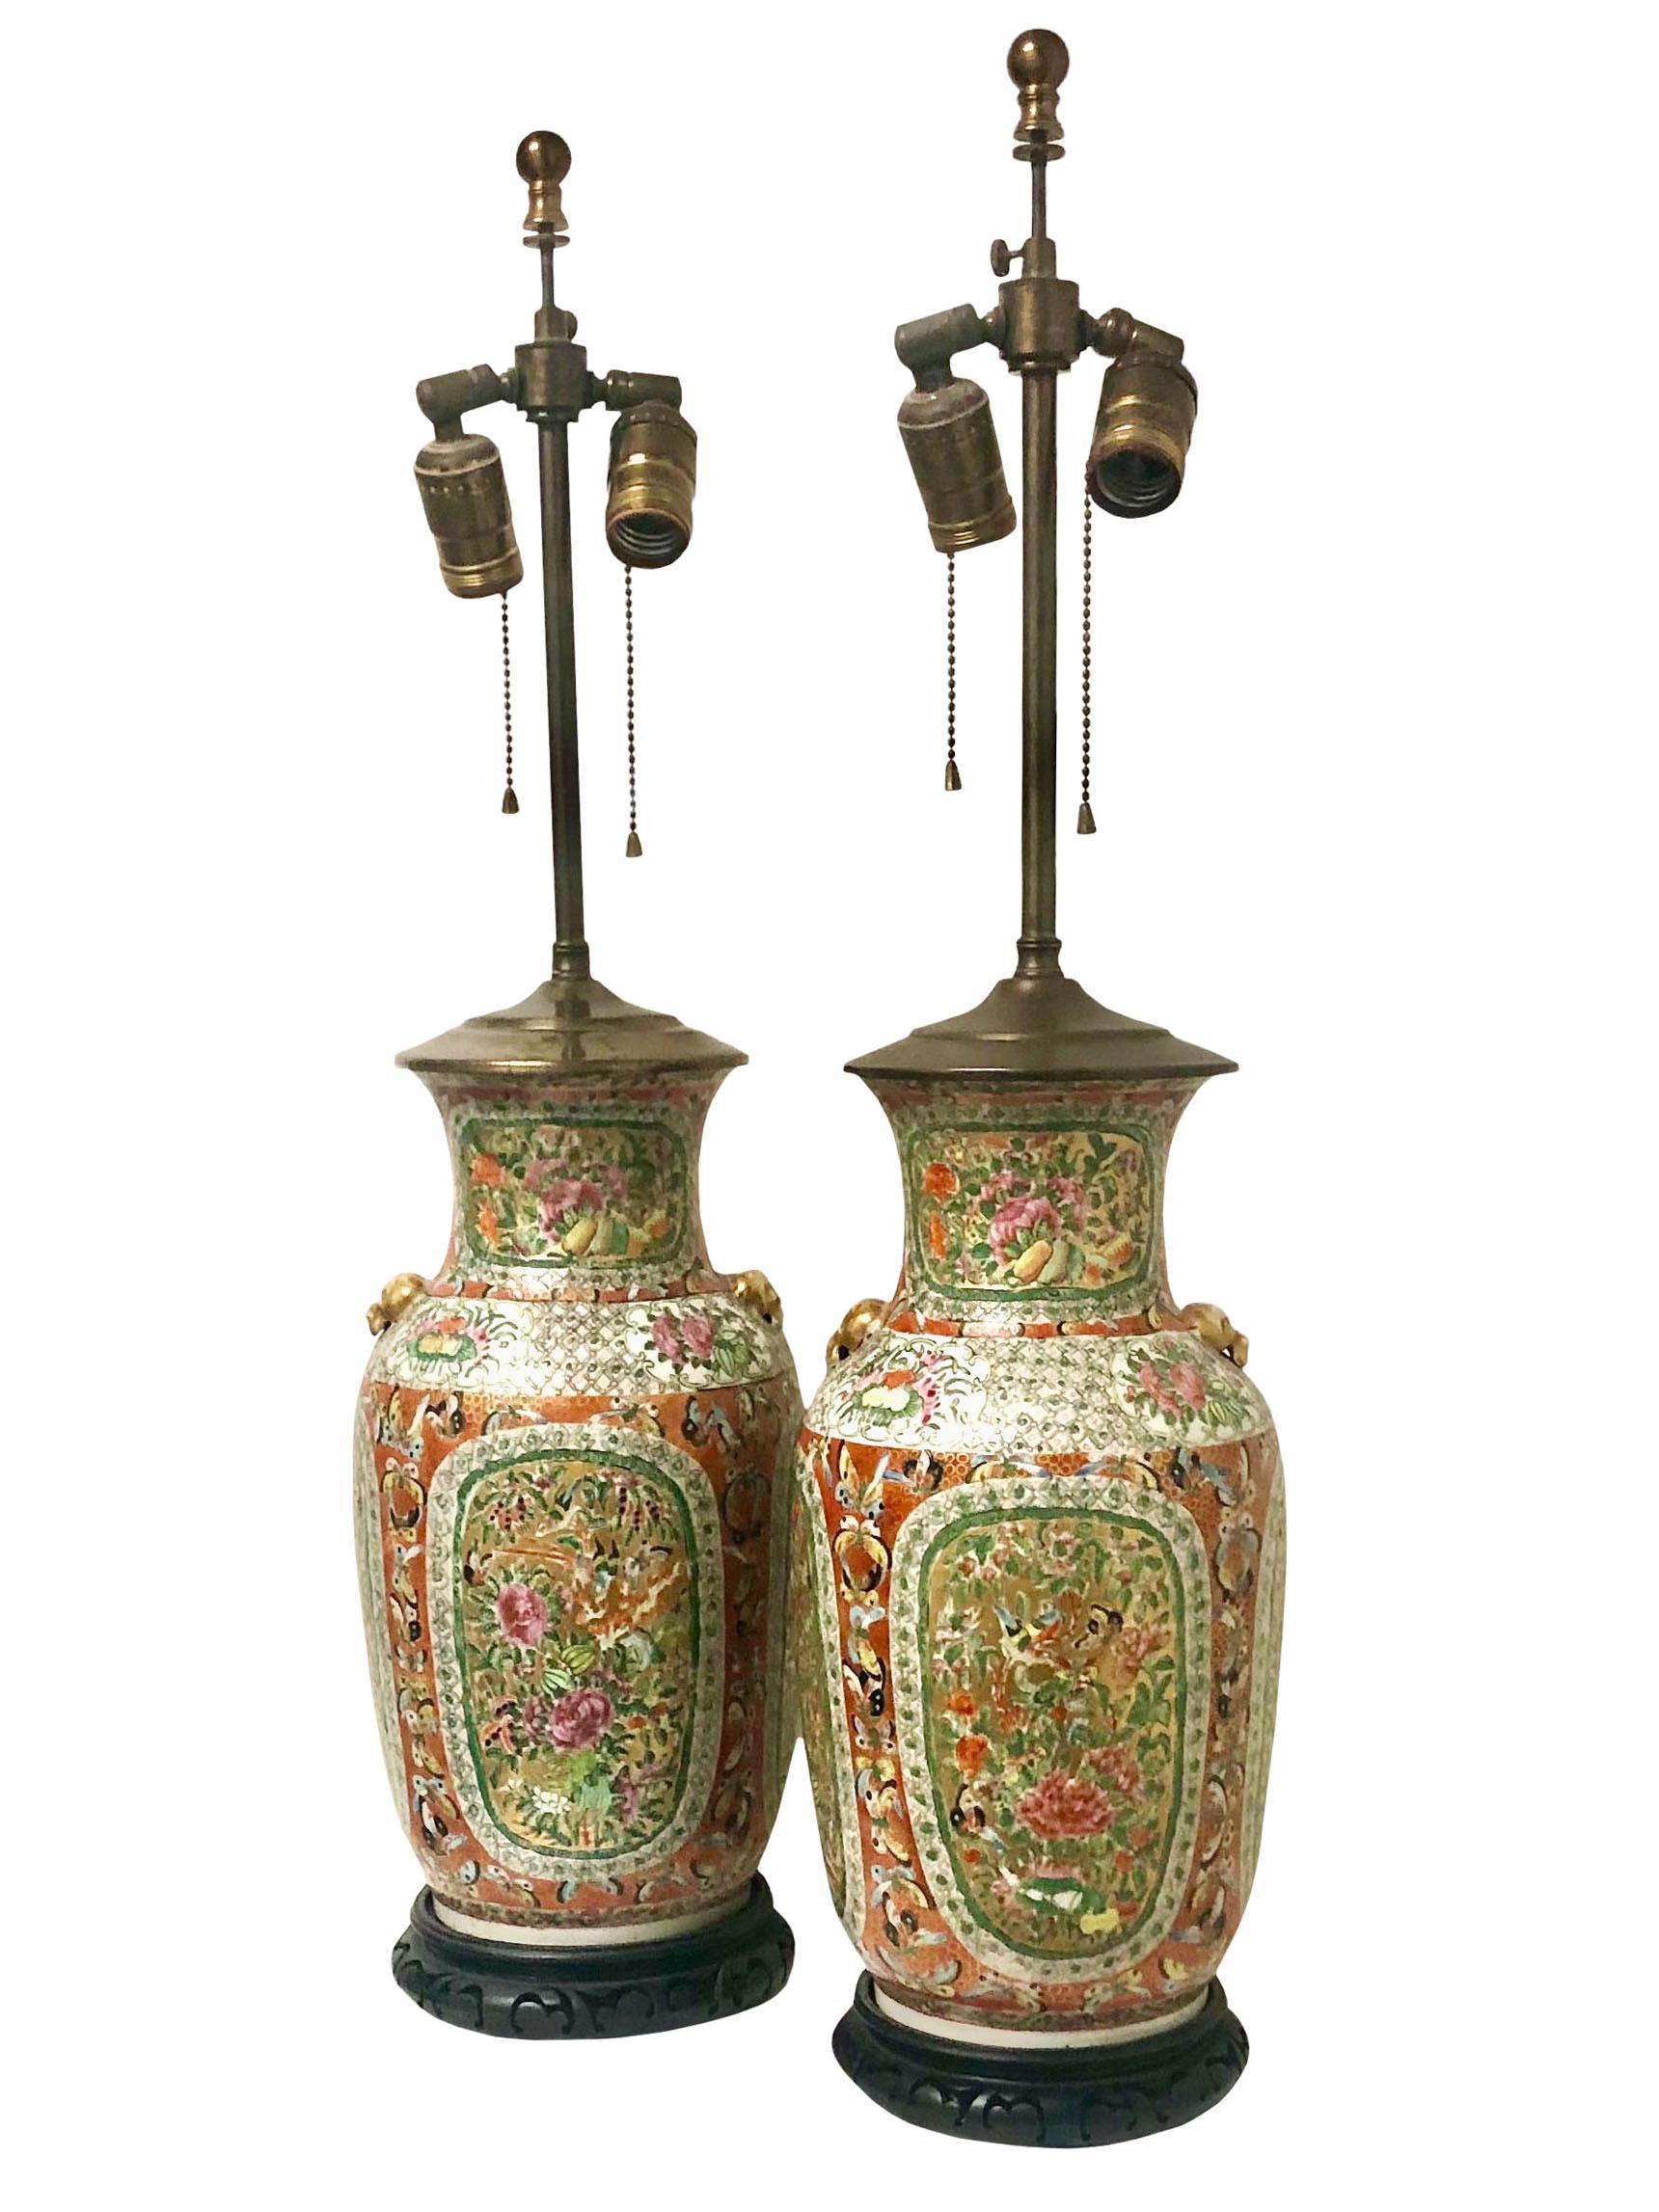 A pair of 19th century rose medallion vases both are in excellent condition probably converted into lamps in the 1950s. They are very unusual butterflies and birds and flowers and It has the little foo dogs on each side of the vases. They are in